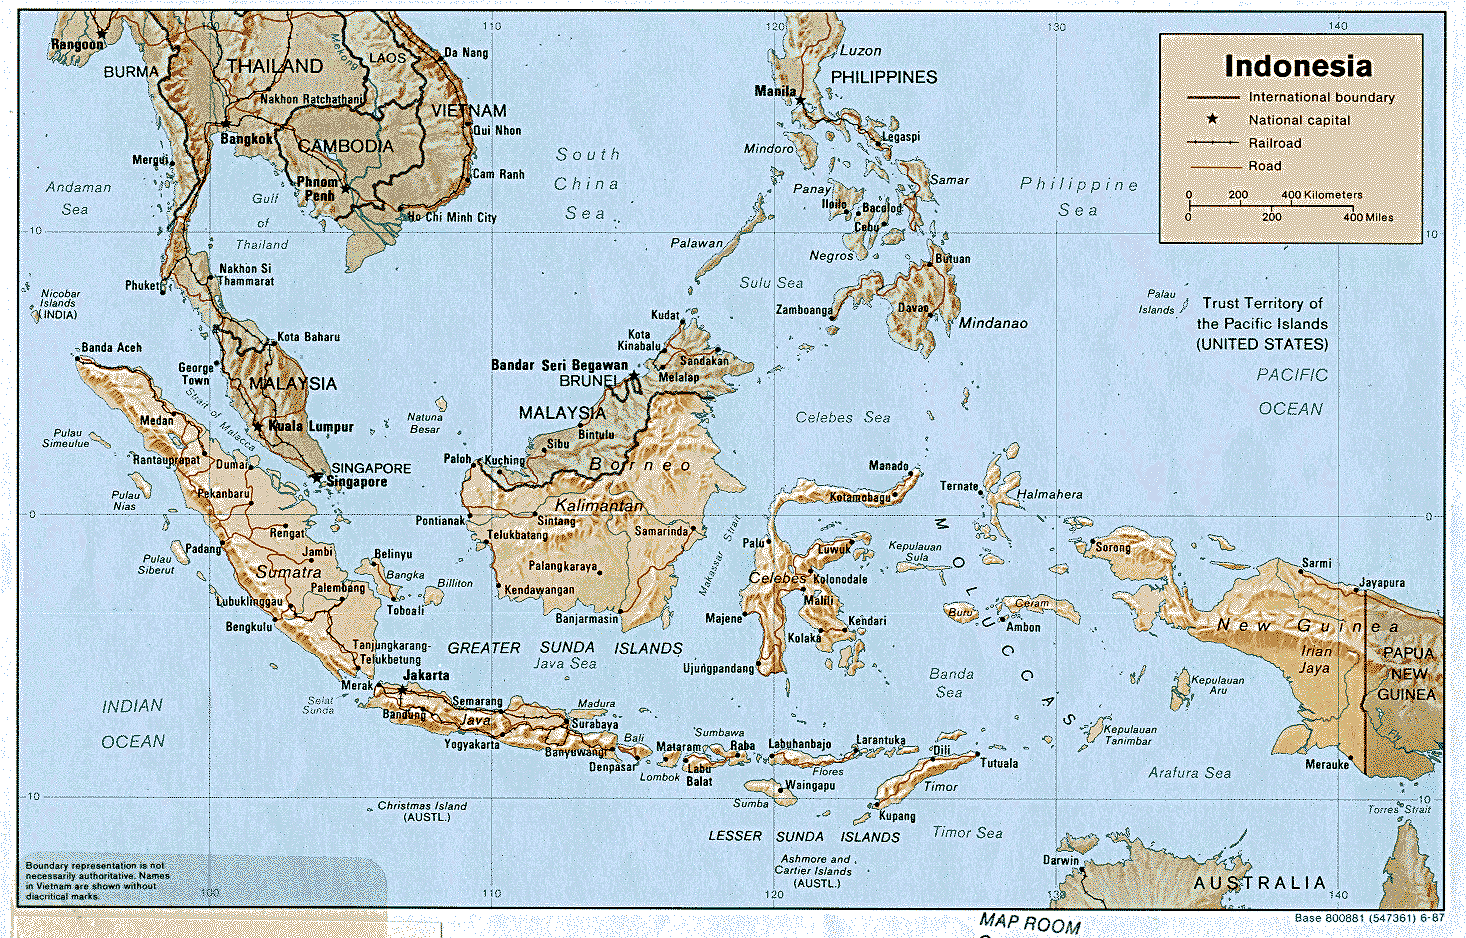 1Up Travel - Maps of Indonesia.Indonesia [Shaded Relief Map] U.S